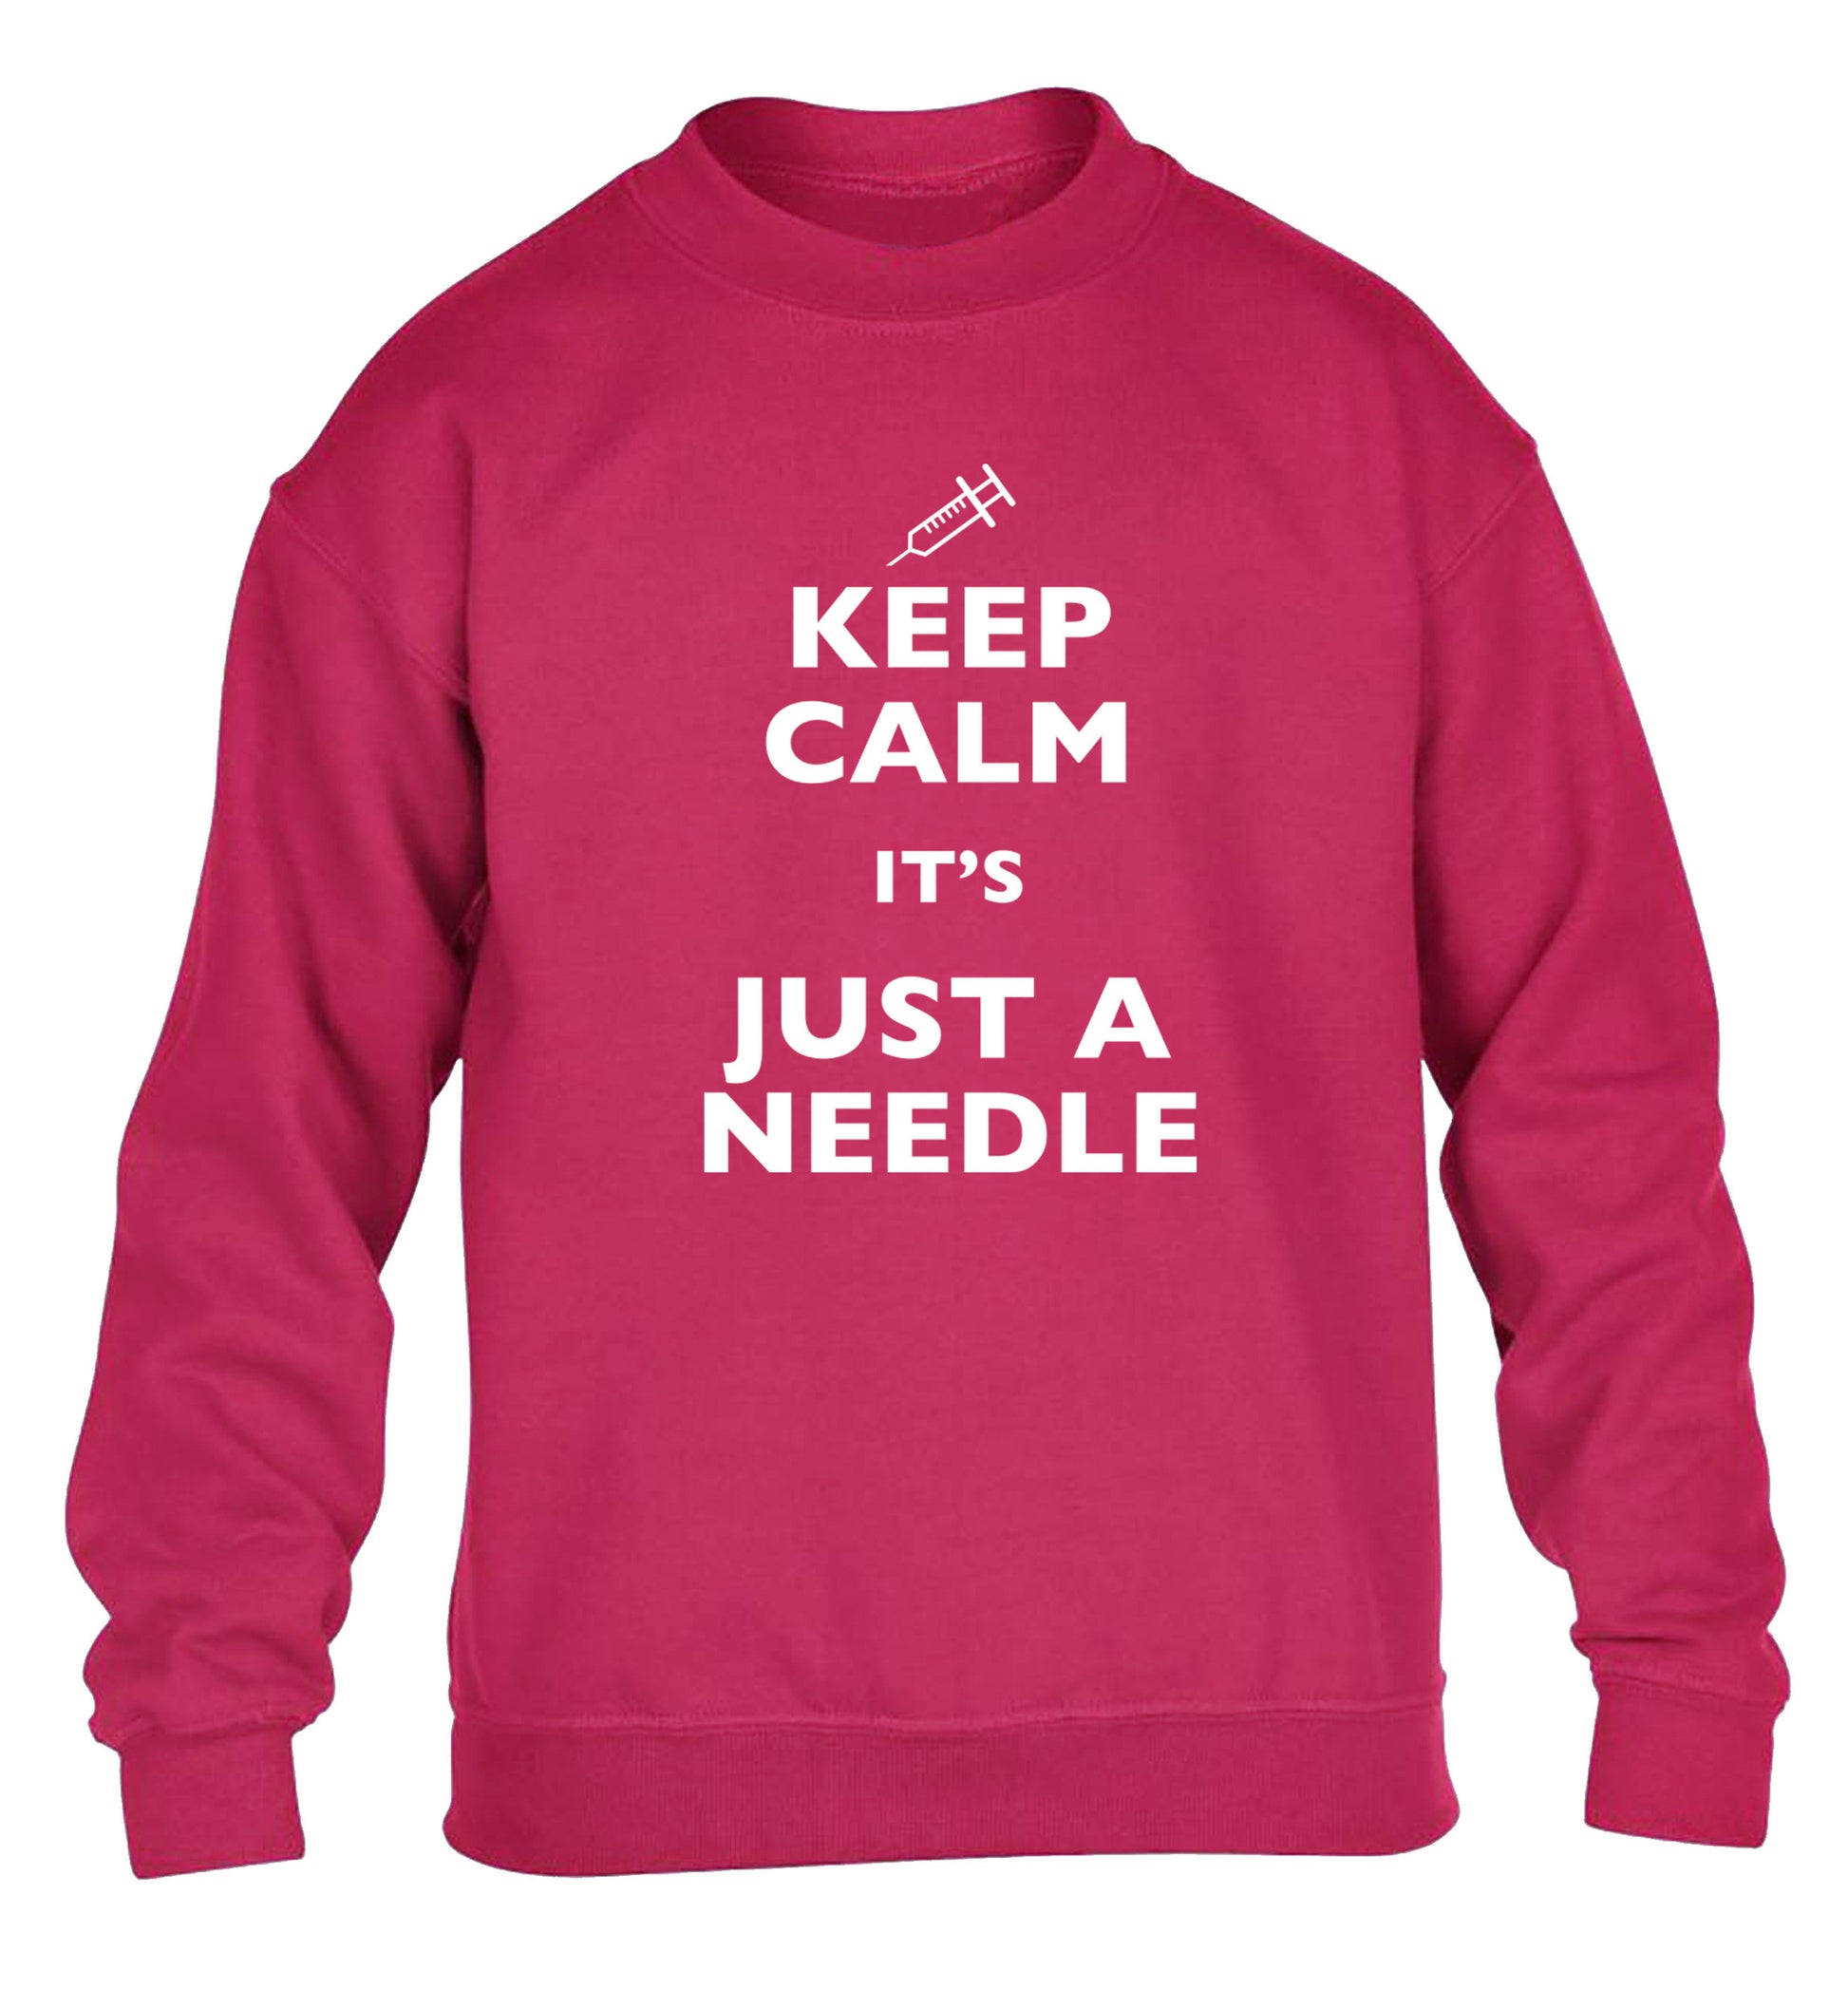 Keep calm it's only a needle children's pink sweater 12-14 Years